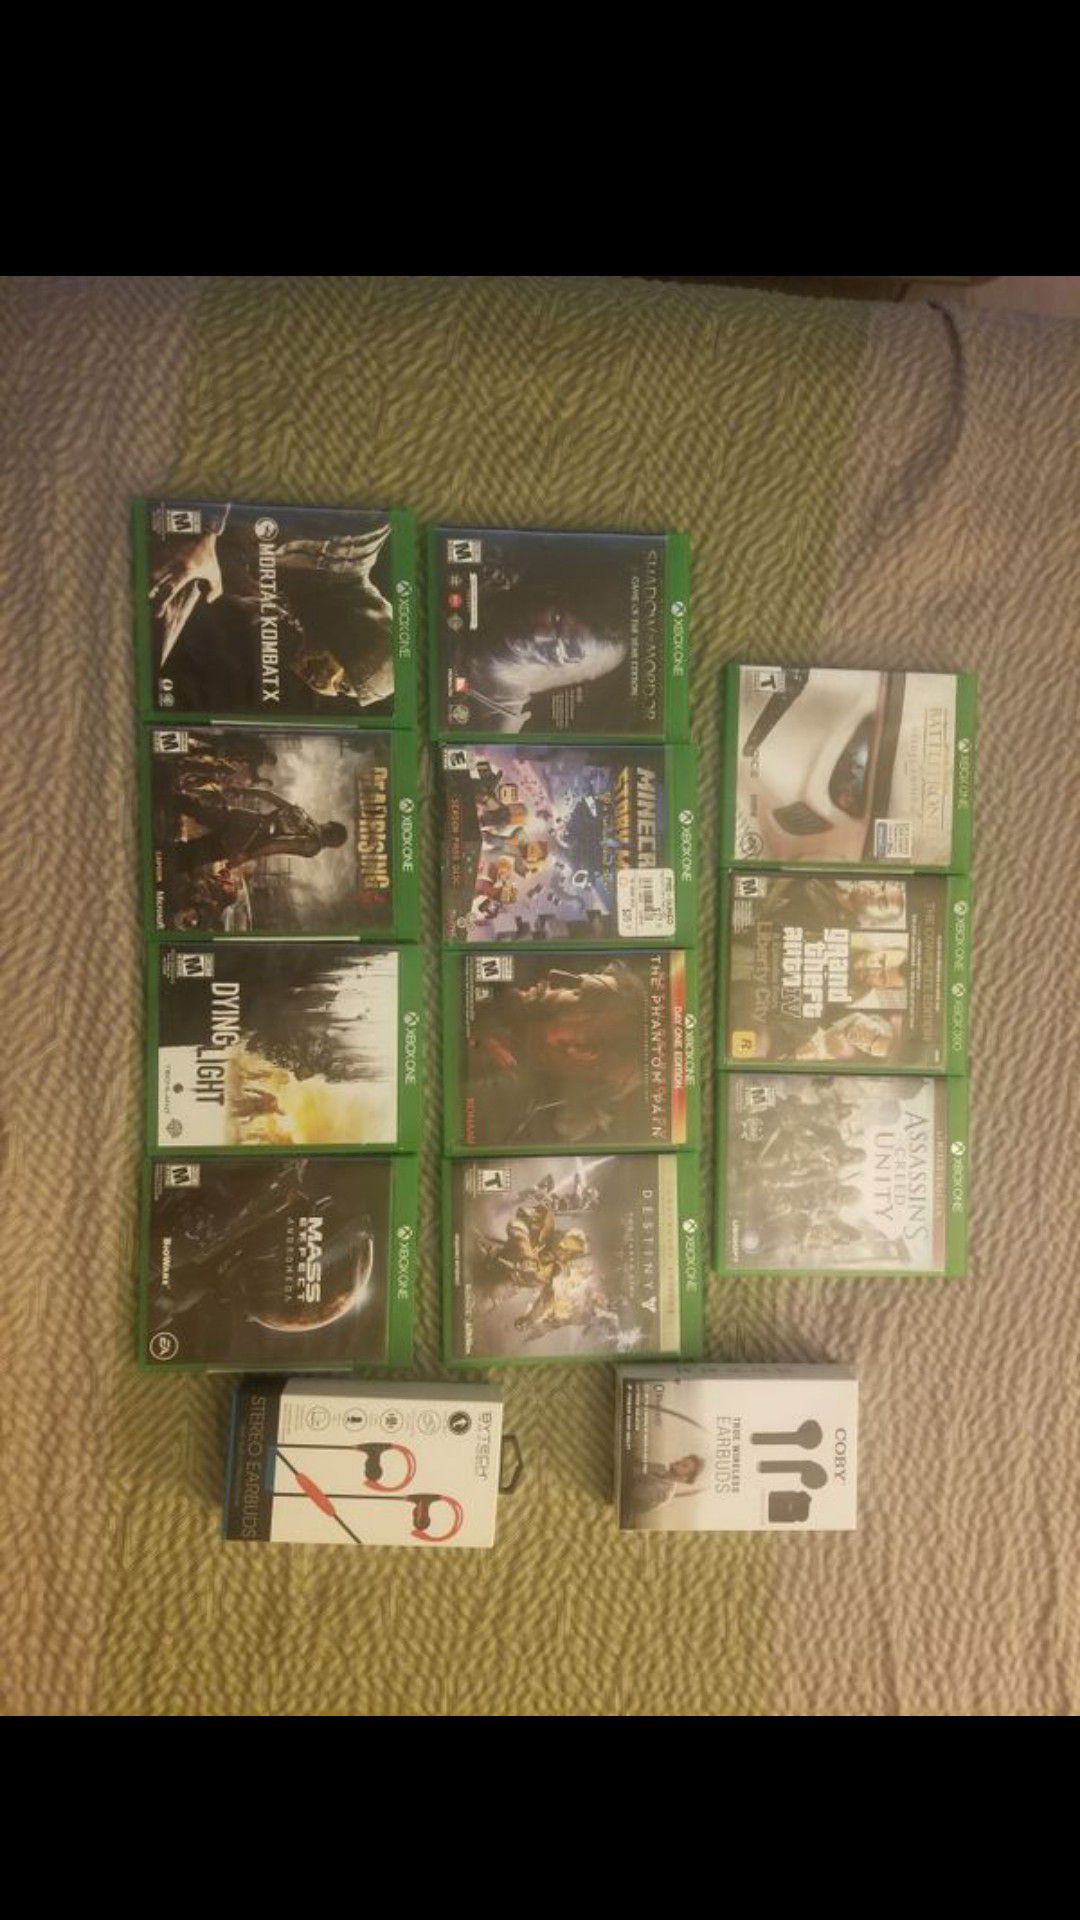 Xbox one games and headphone 80 for all or 10 each